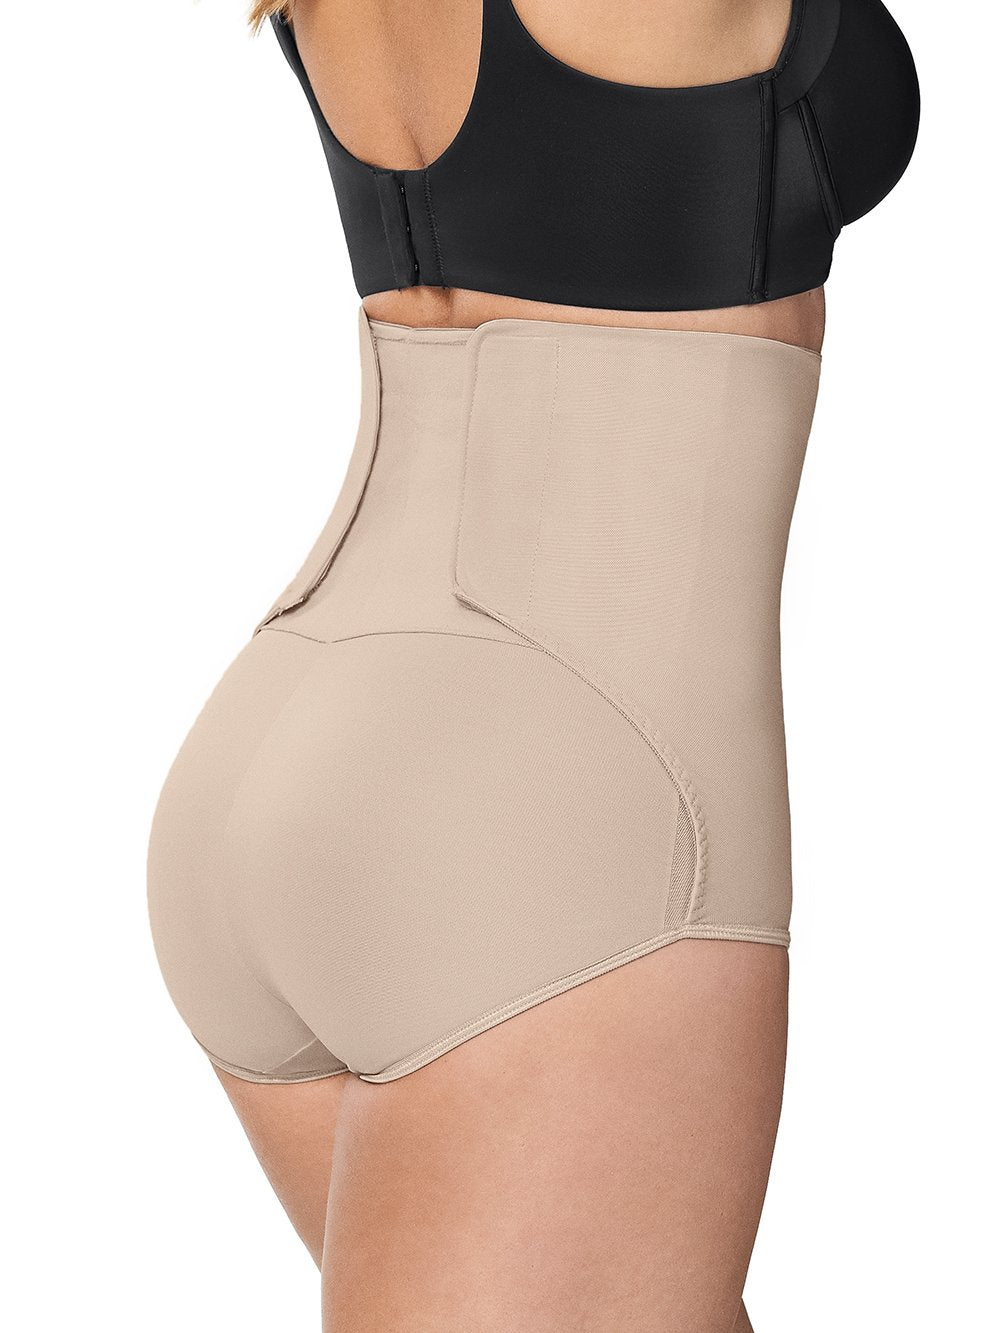 FYCONE Postpartum Underwear for Women - C-Section High Waist Girdle Panty  with Adjustabe Belly Wrap Tight Legging